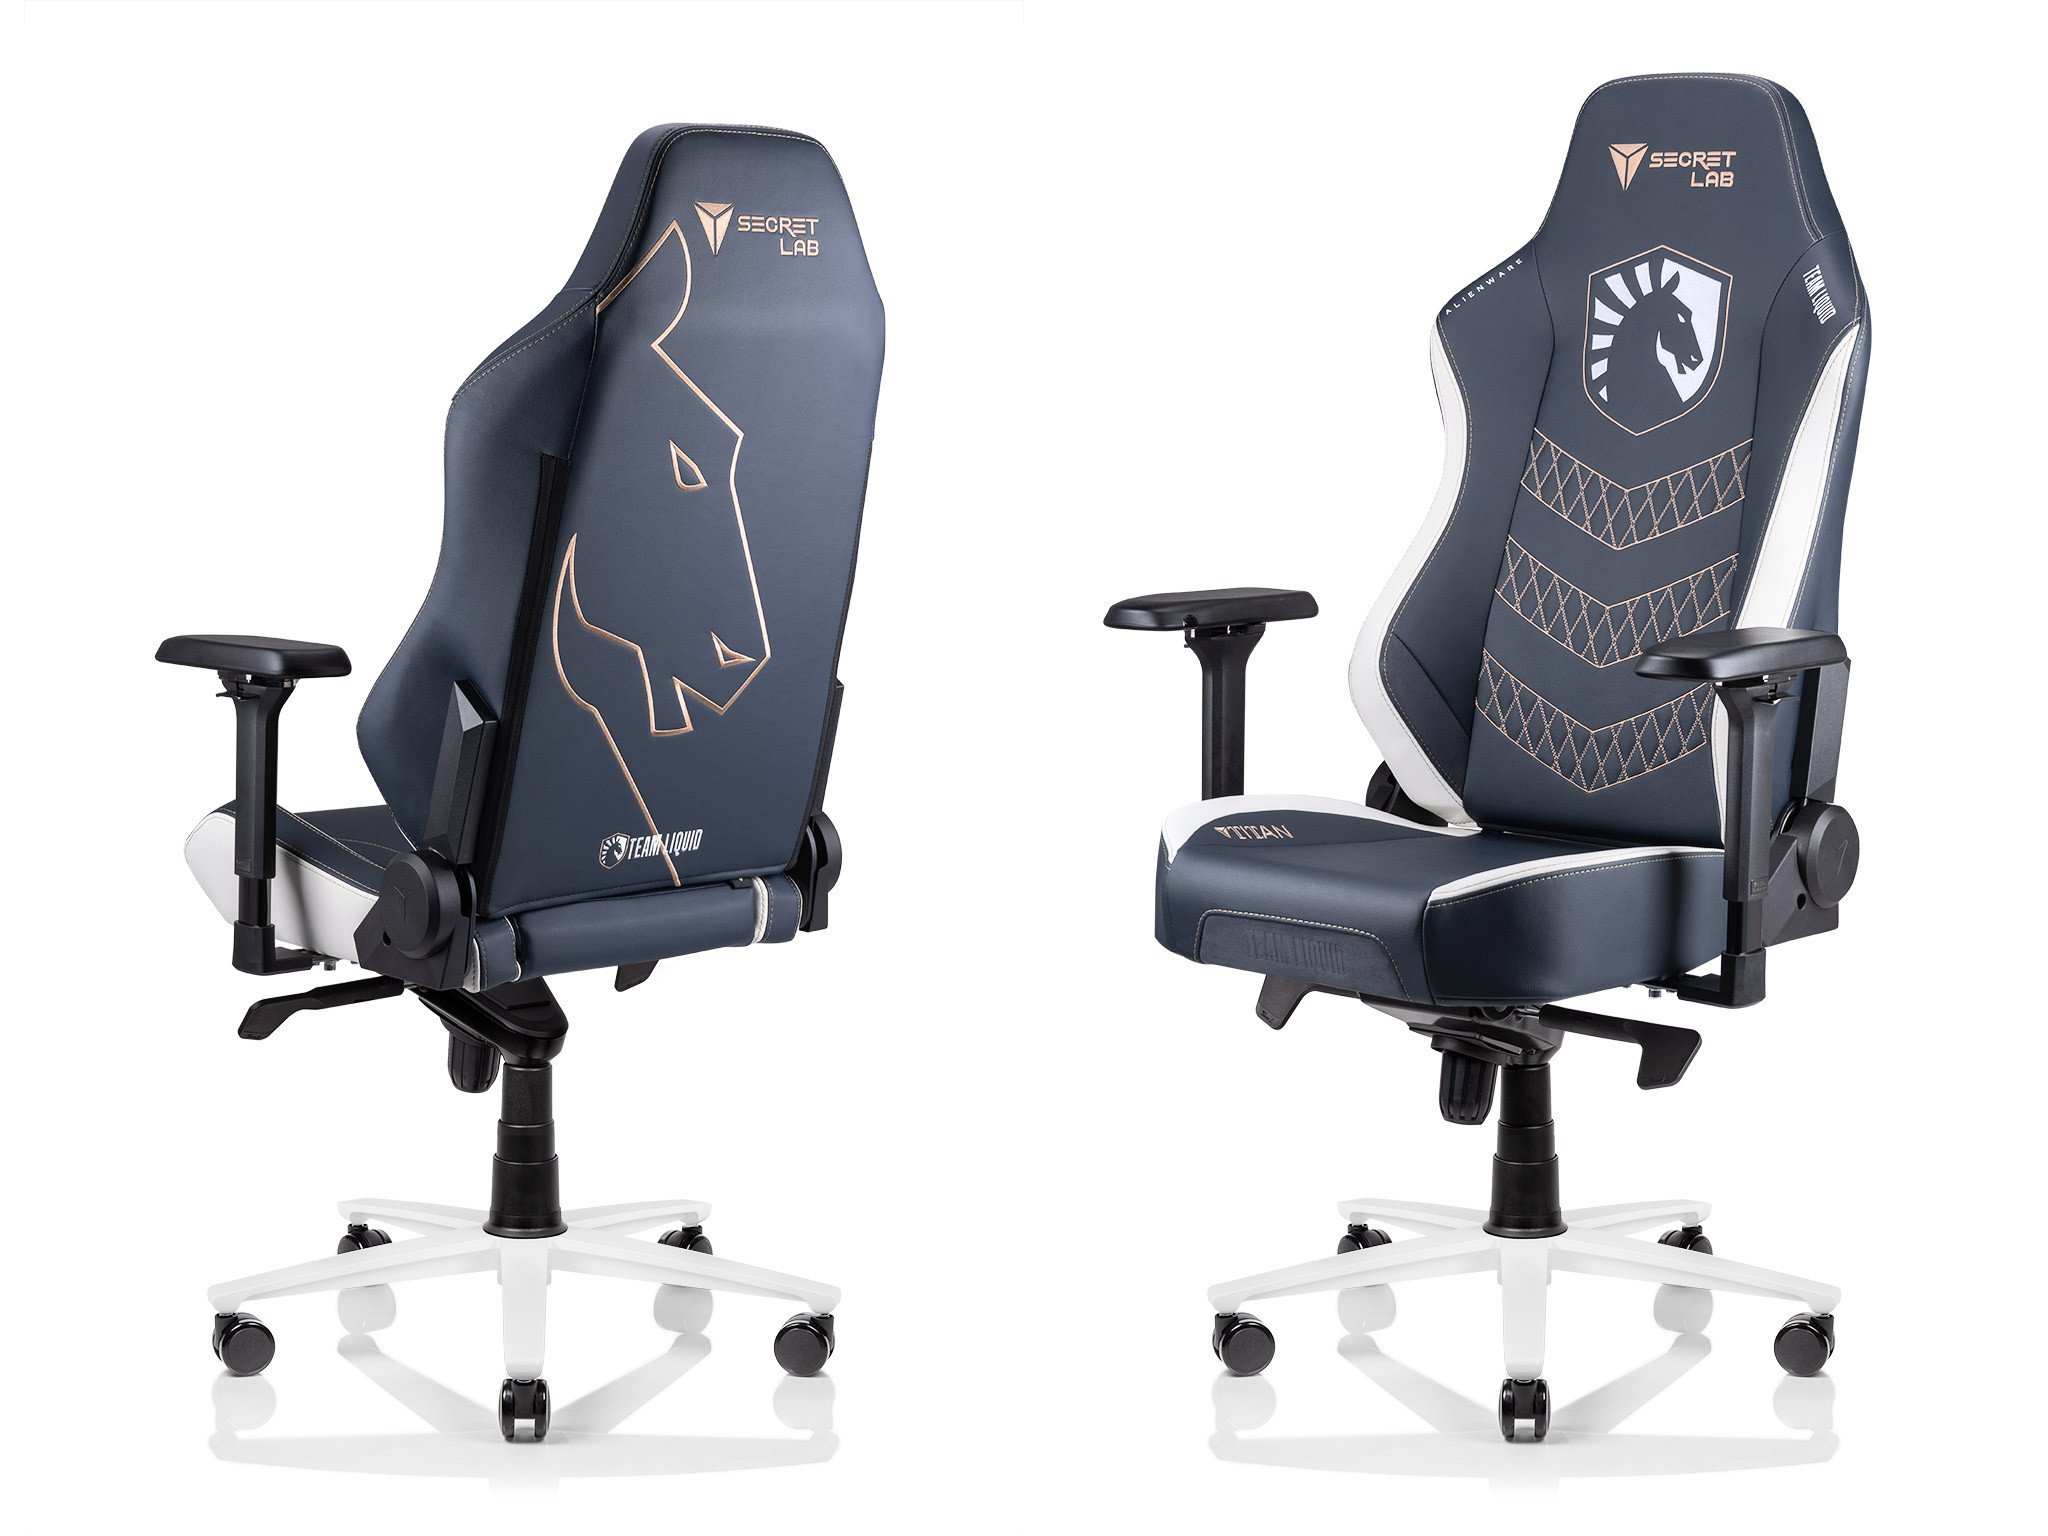 Secretlab partnered with Team Liquid to create two editions of its gaming c...